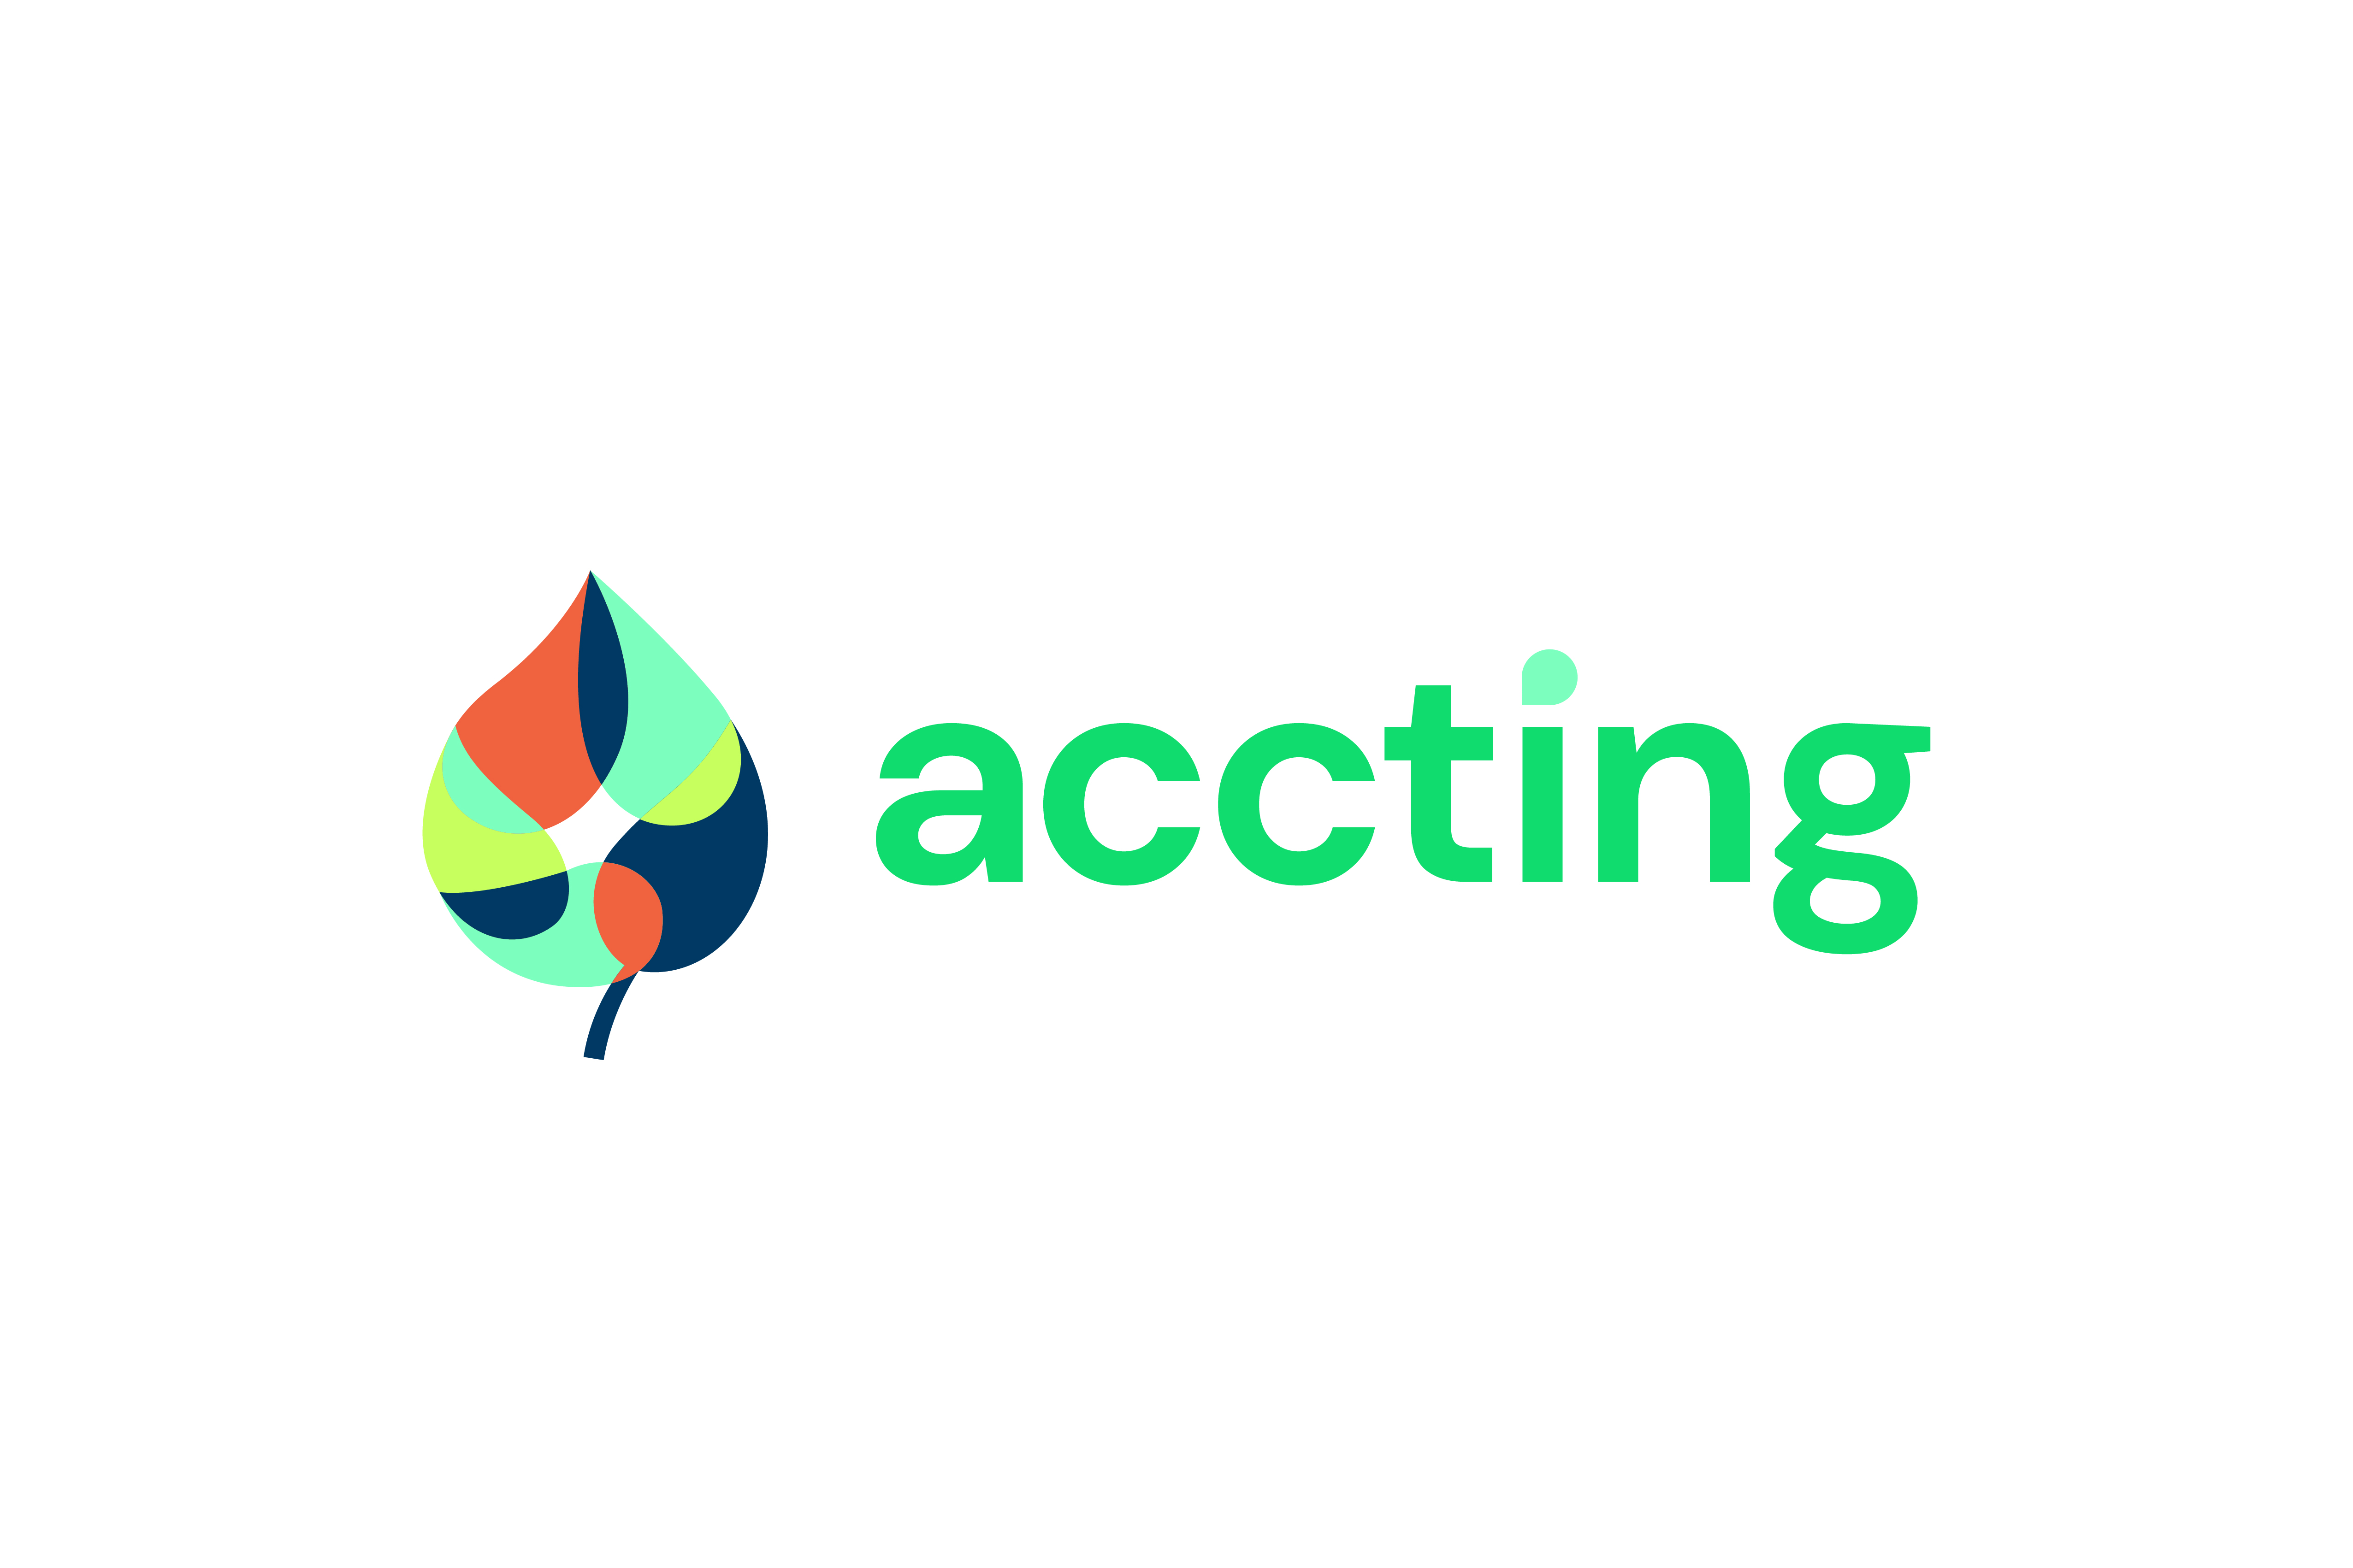 Logo of the ACCTING project